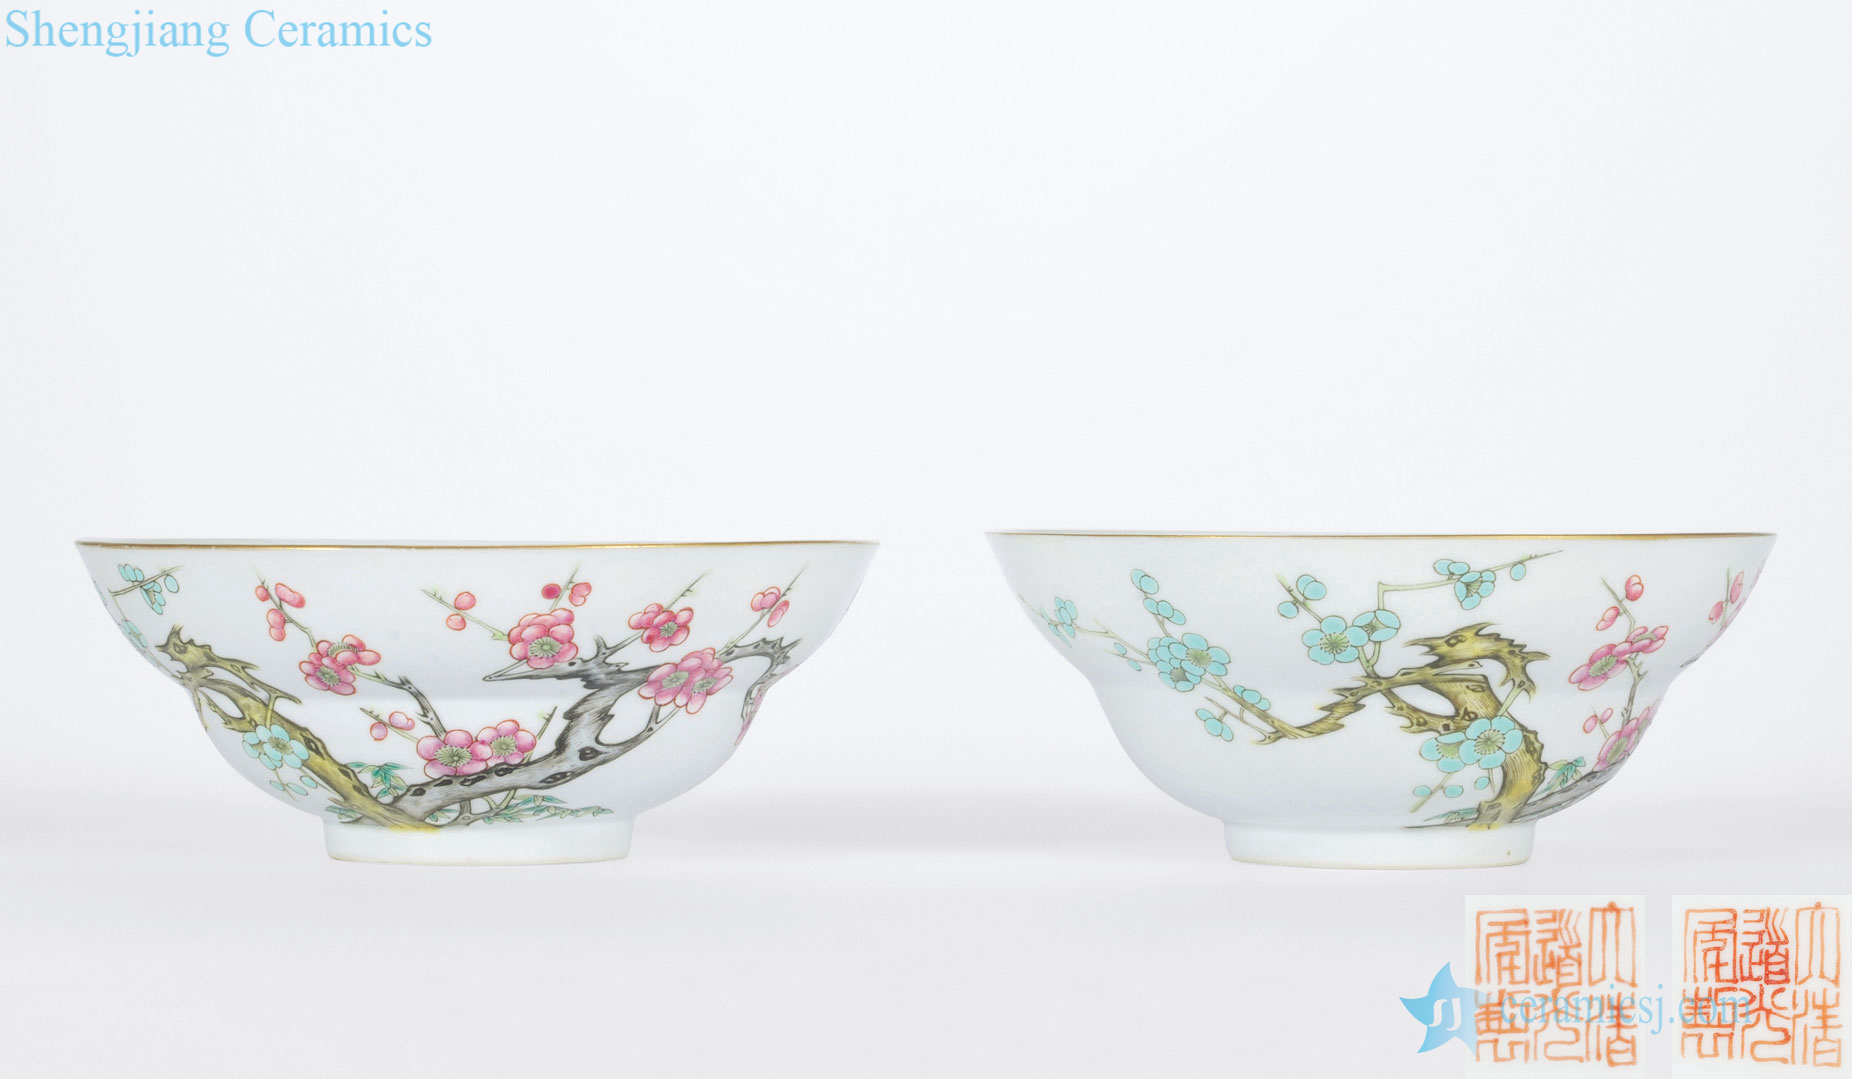 Clear light pastel plum flower pattern or bowl (a)